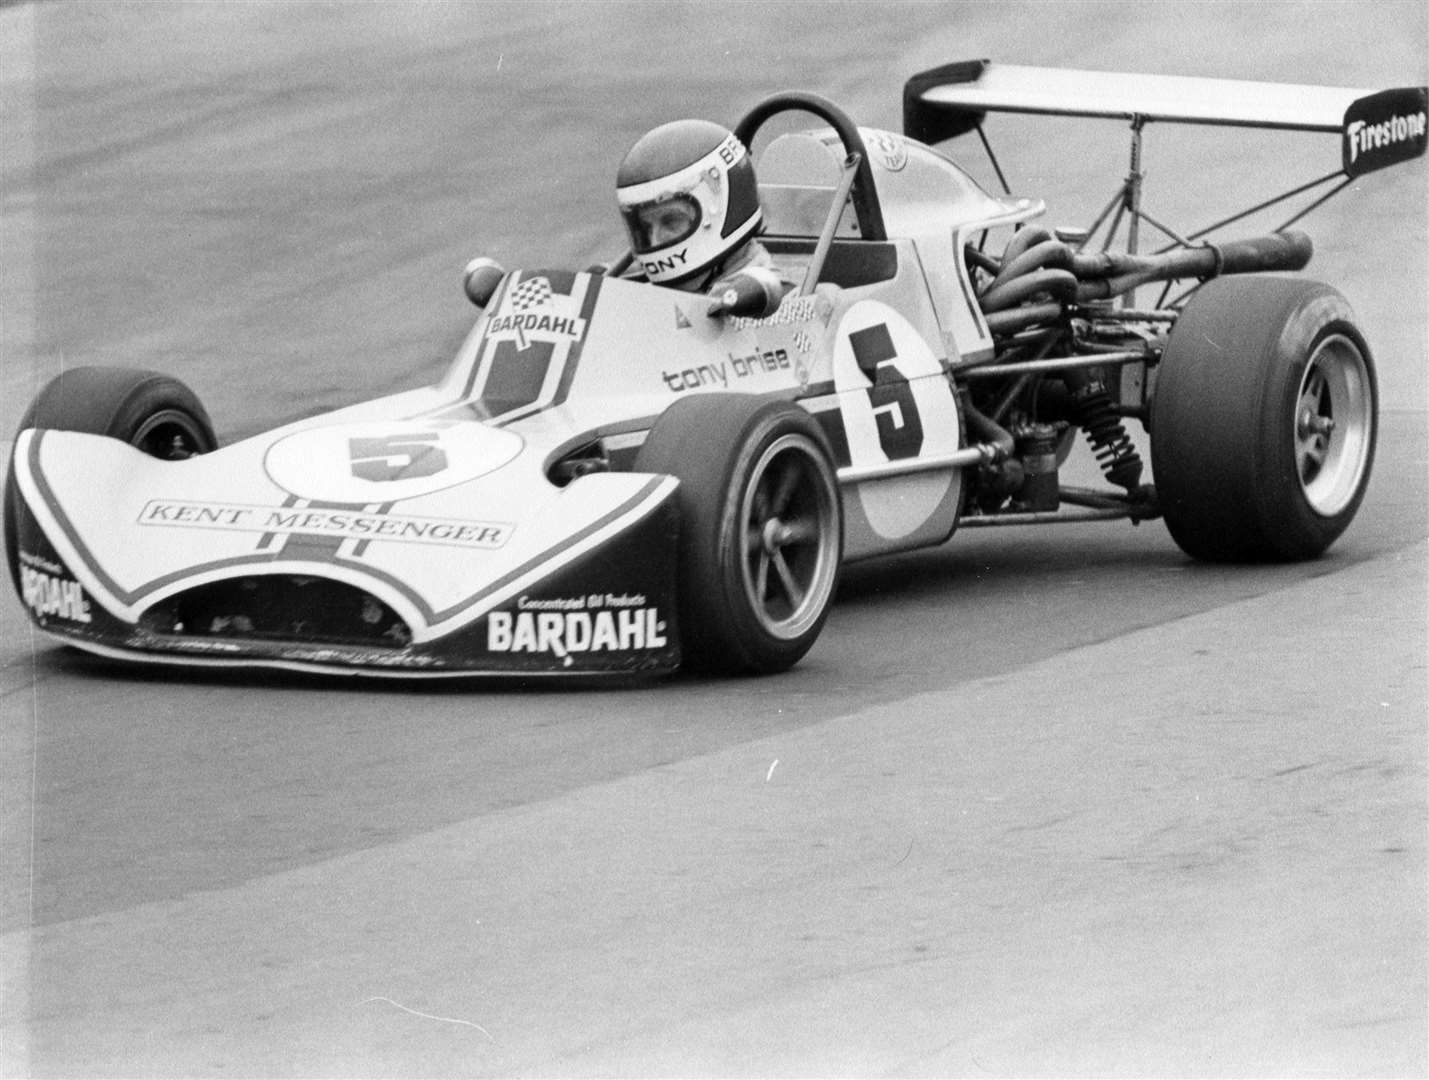 Brise at work in his March 733. He was an importer of Bardahl motor oil which explains the sponsorship on the front wing